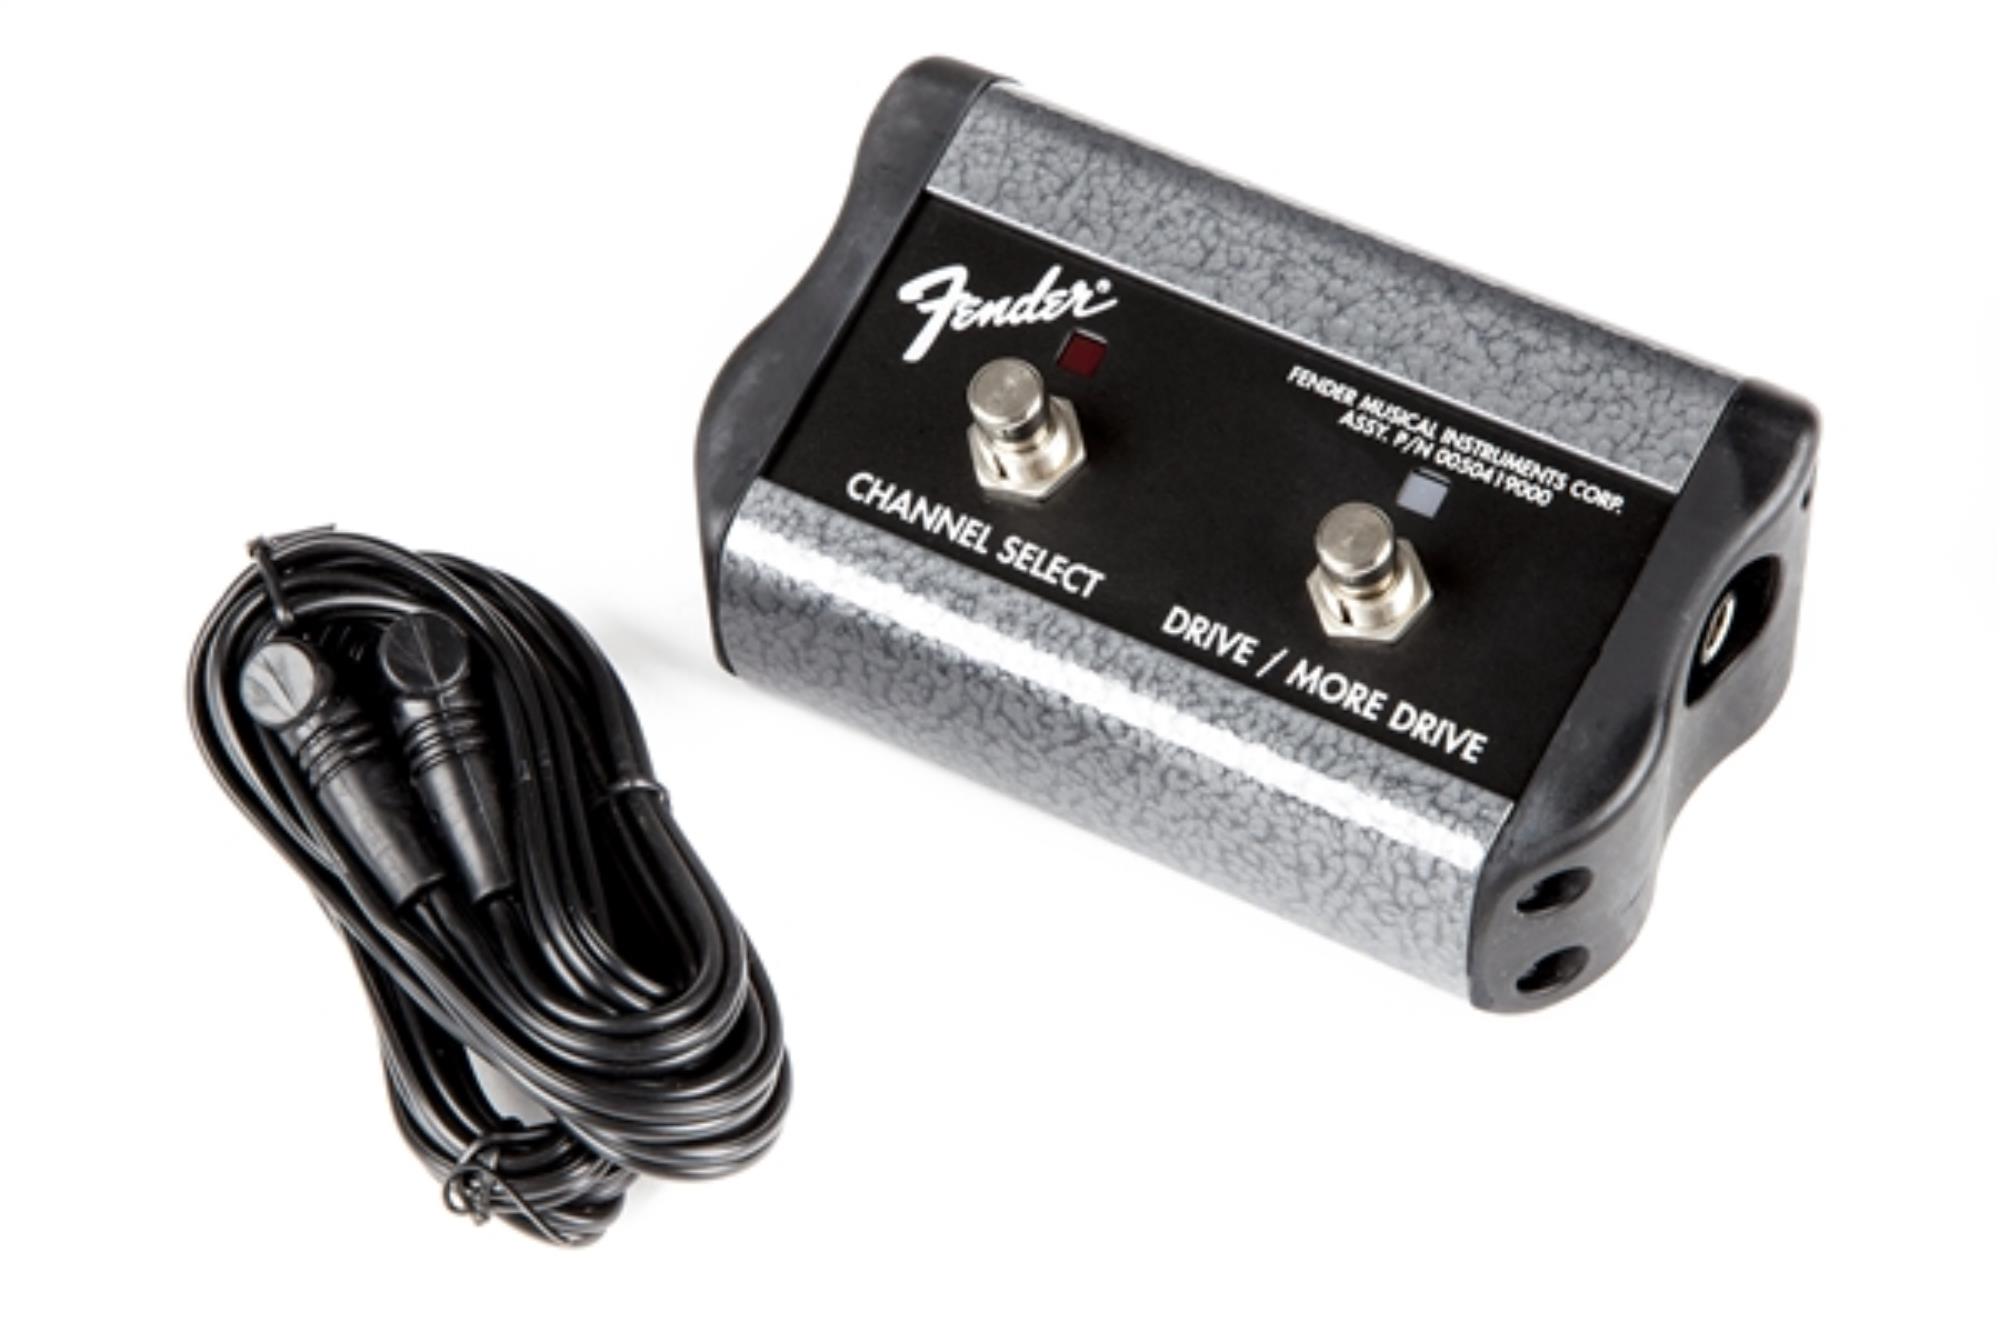 FENDER-2-Button-3-Function-Footswitch-Channel-Gain-More-Gain-with-1-4-Jack-0994062000-sku-550022327